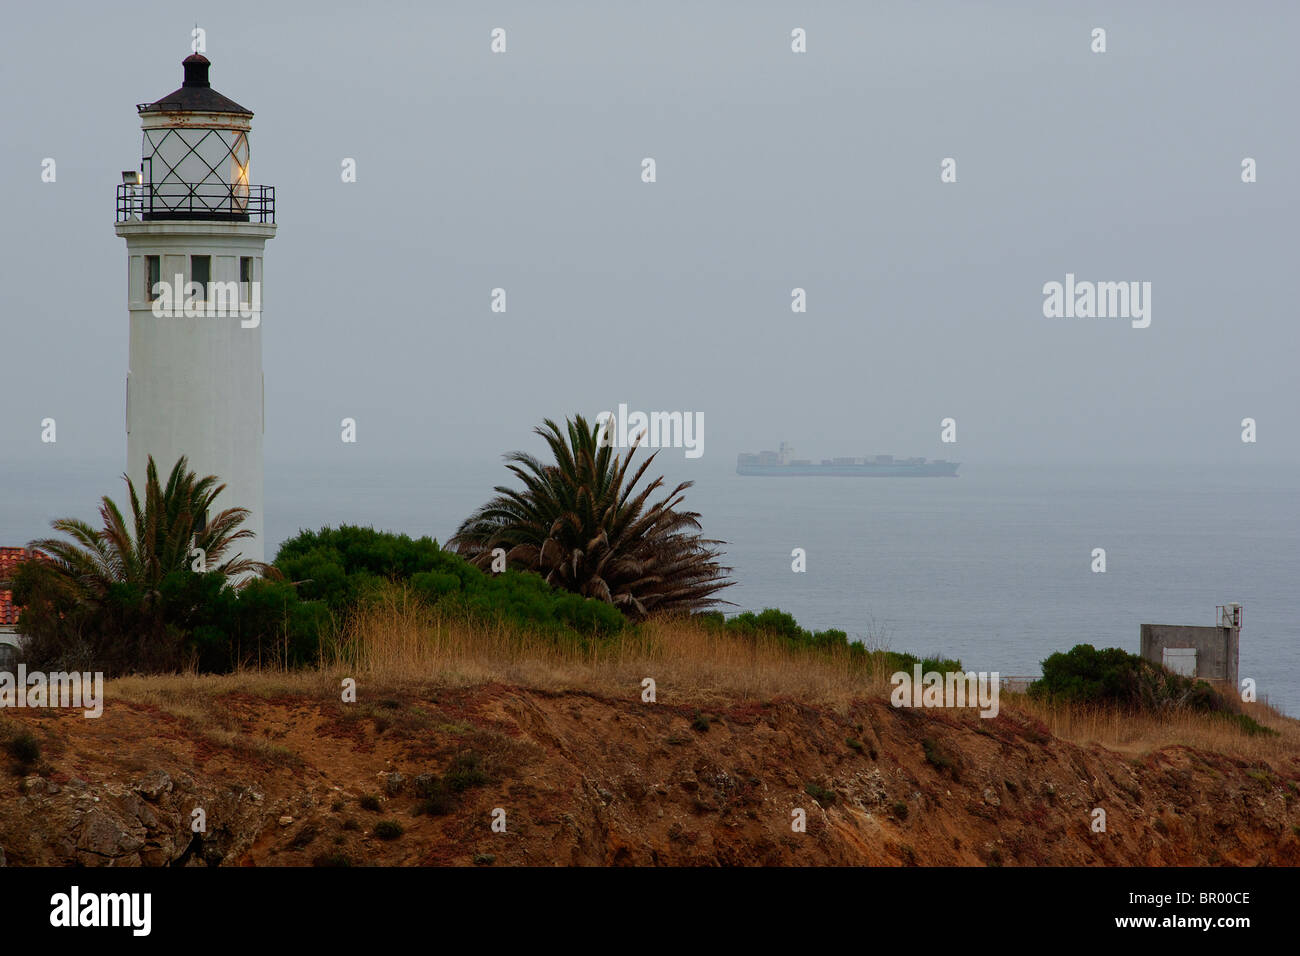 Point Vicente Lighthouse in Rancho Palos Verdes, California, USA. The lighthouse was added to the National Register of Historic Places in 1980. Stock Photo